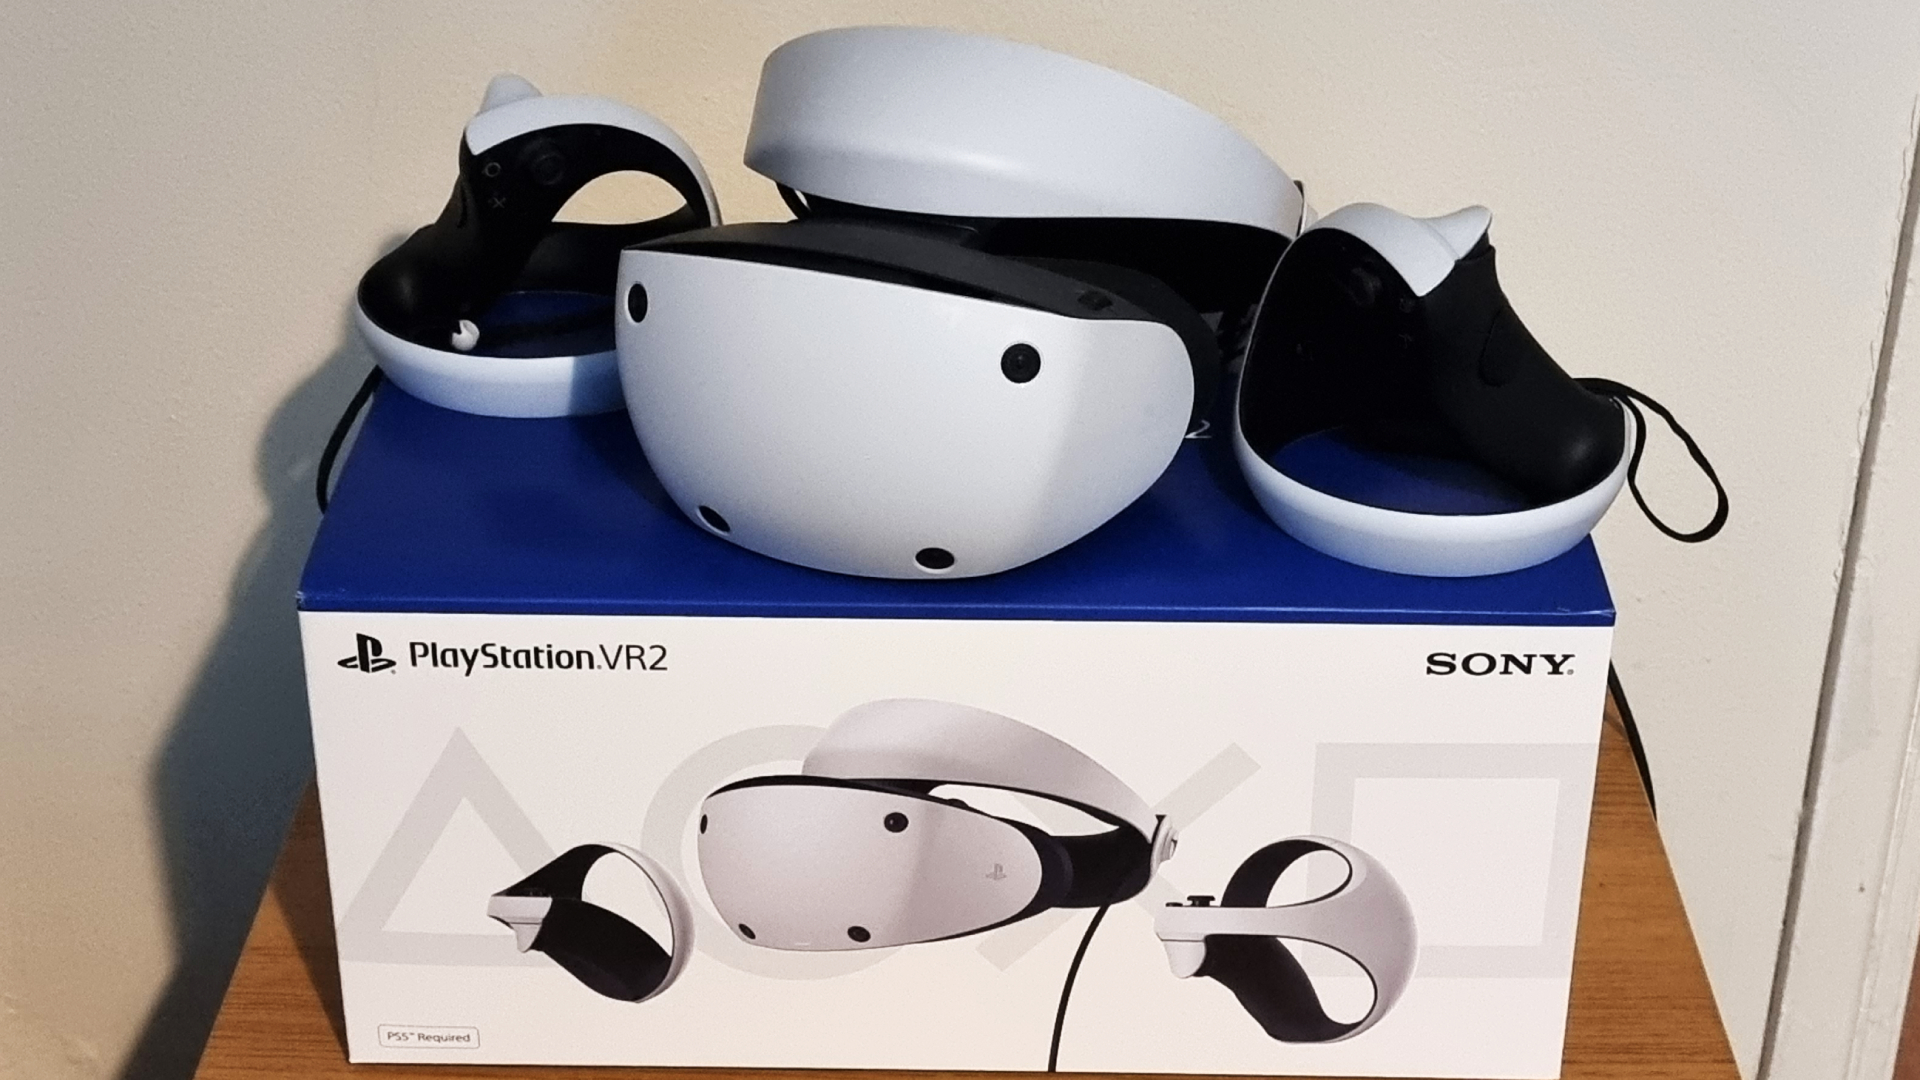 The PSVR 2 sitting in its box